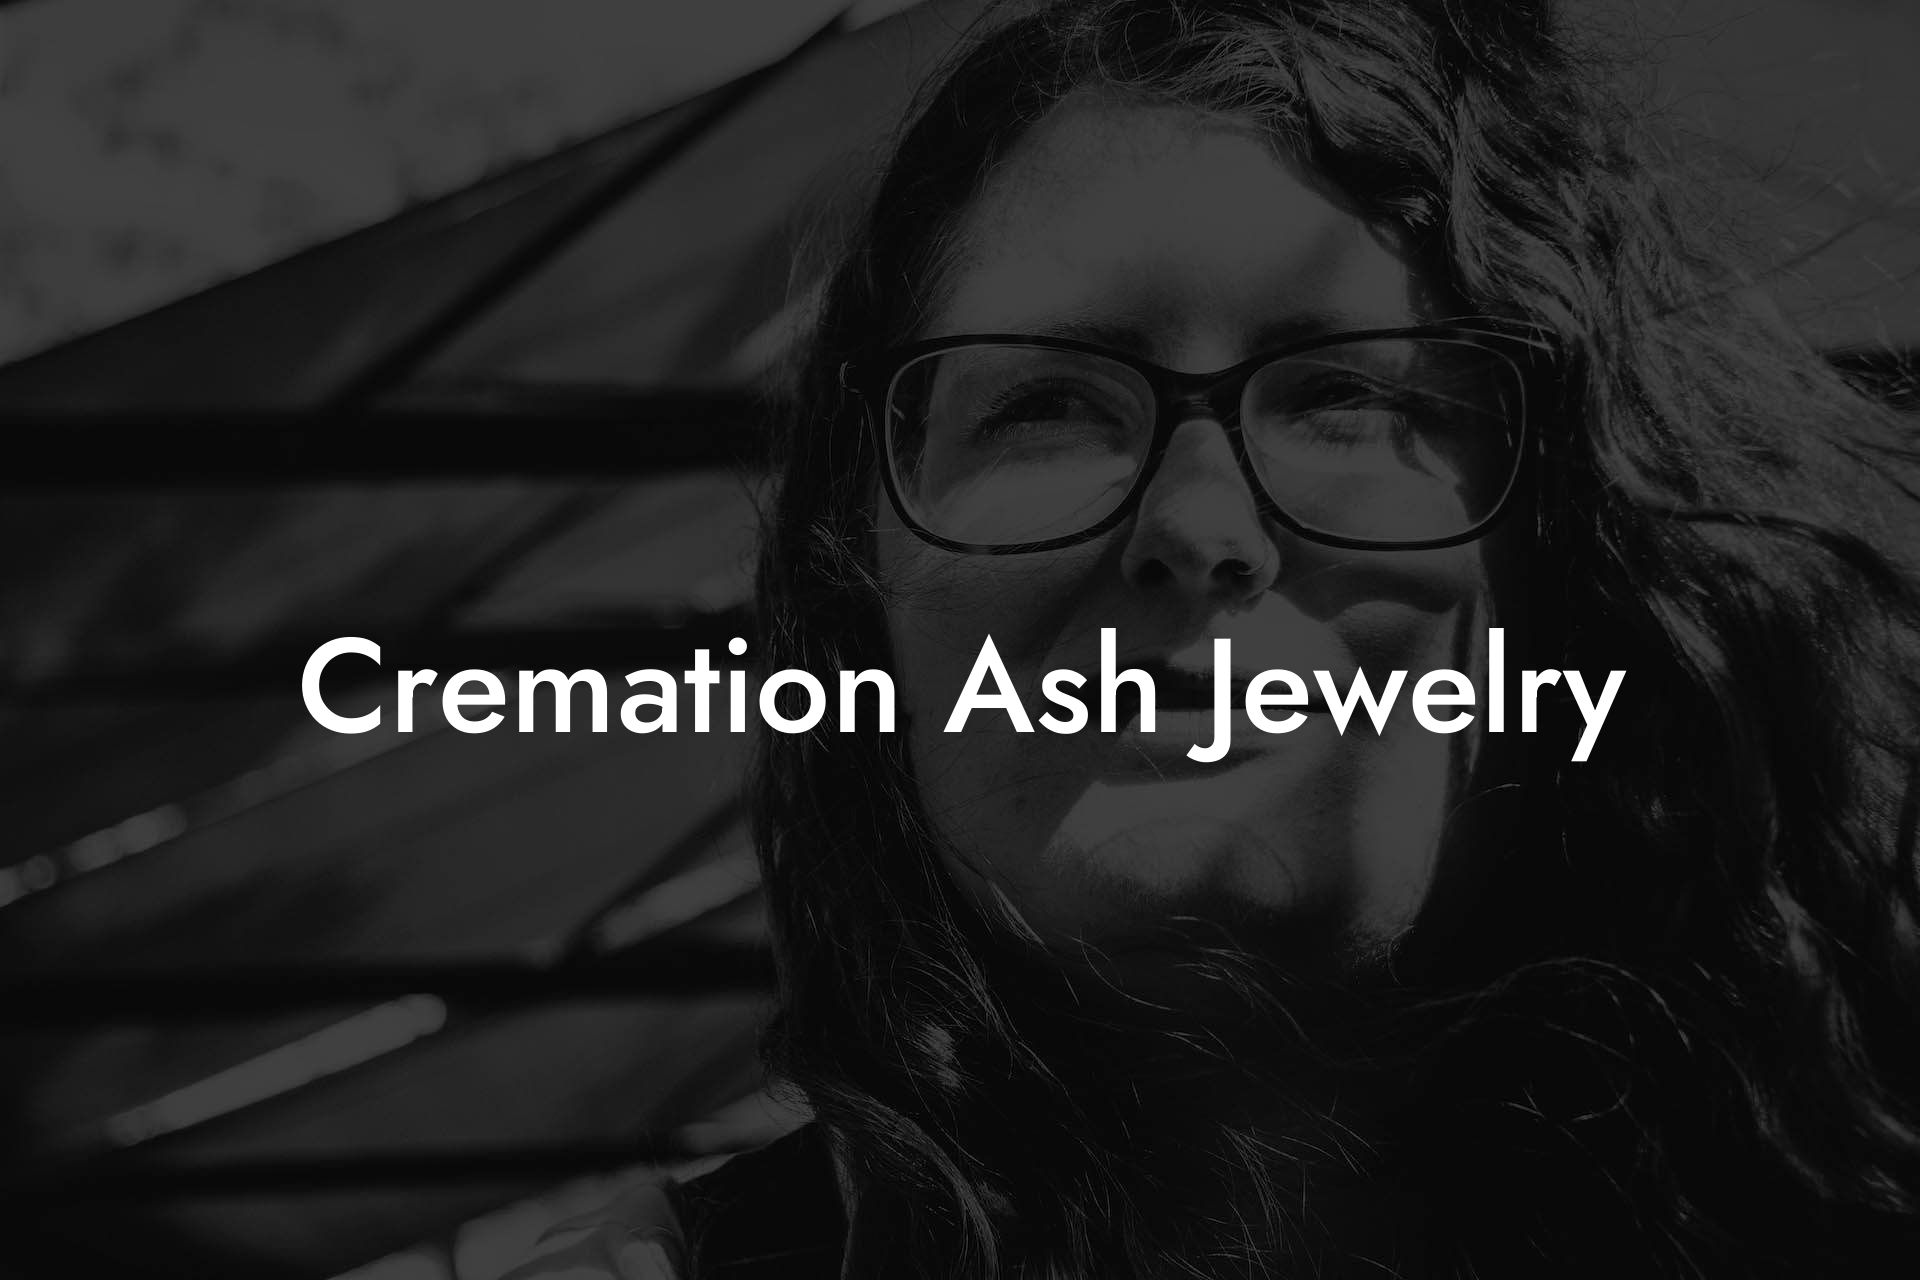 Cremation Ash Jewelry